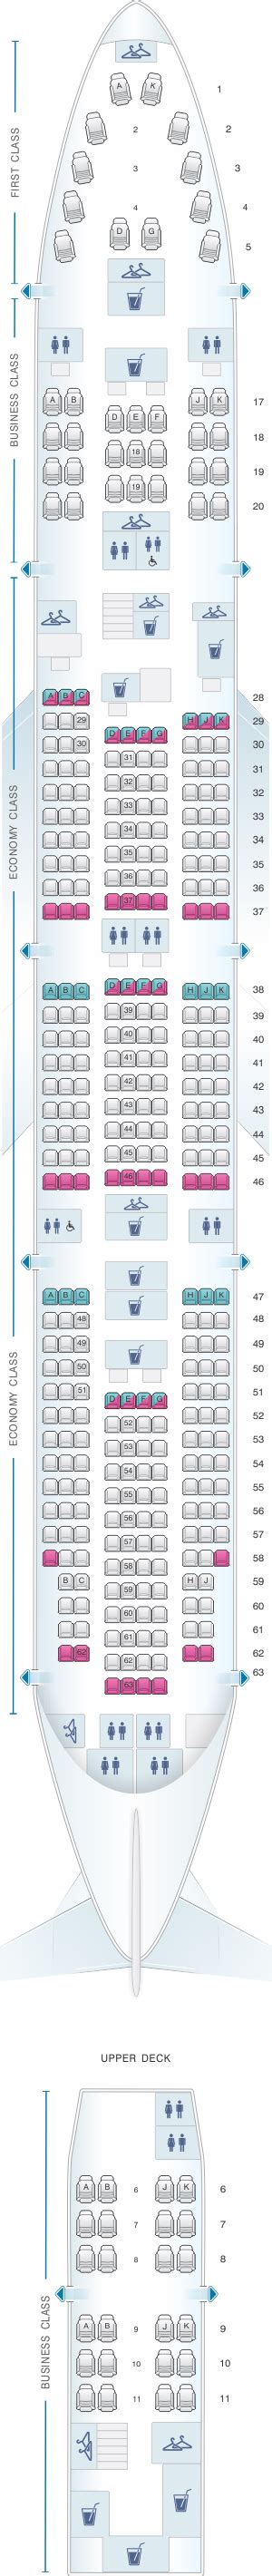 Seat Map China Airlines Boeing B747 400 380pax Seatmaestro